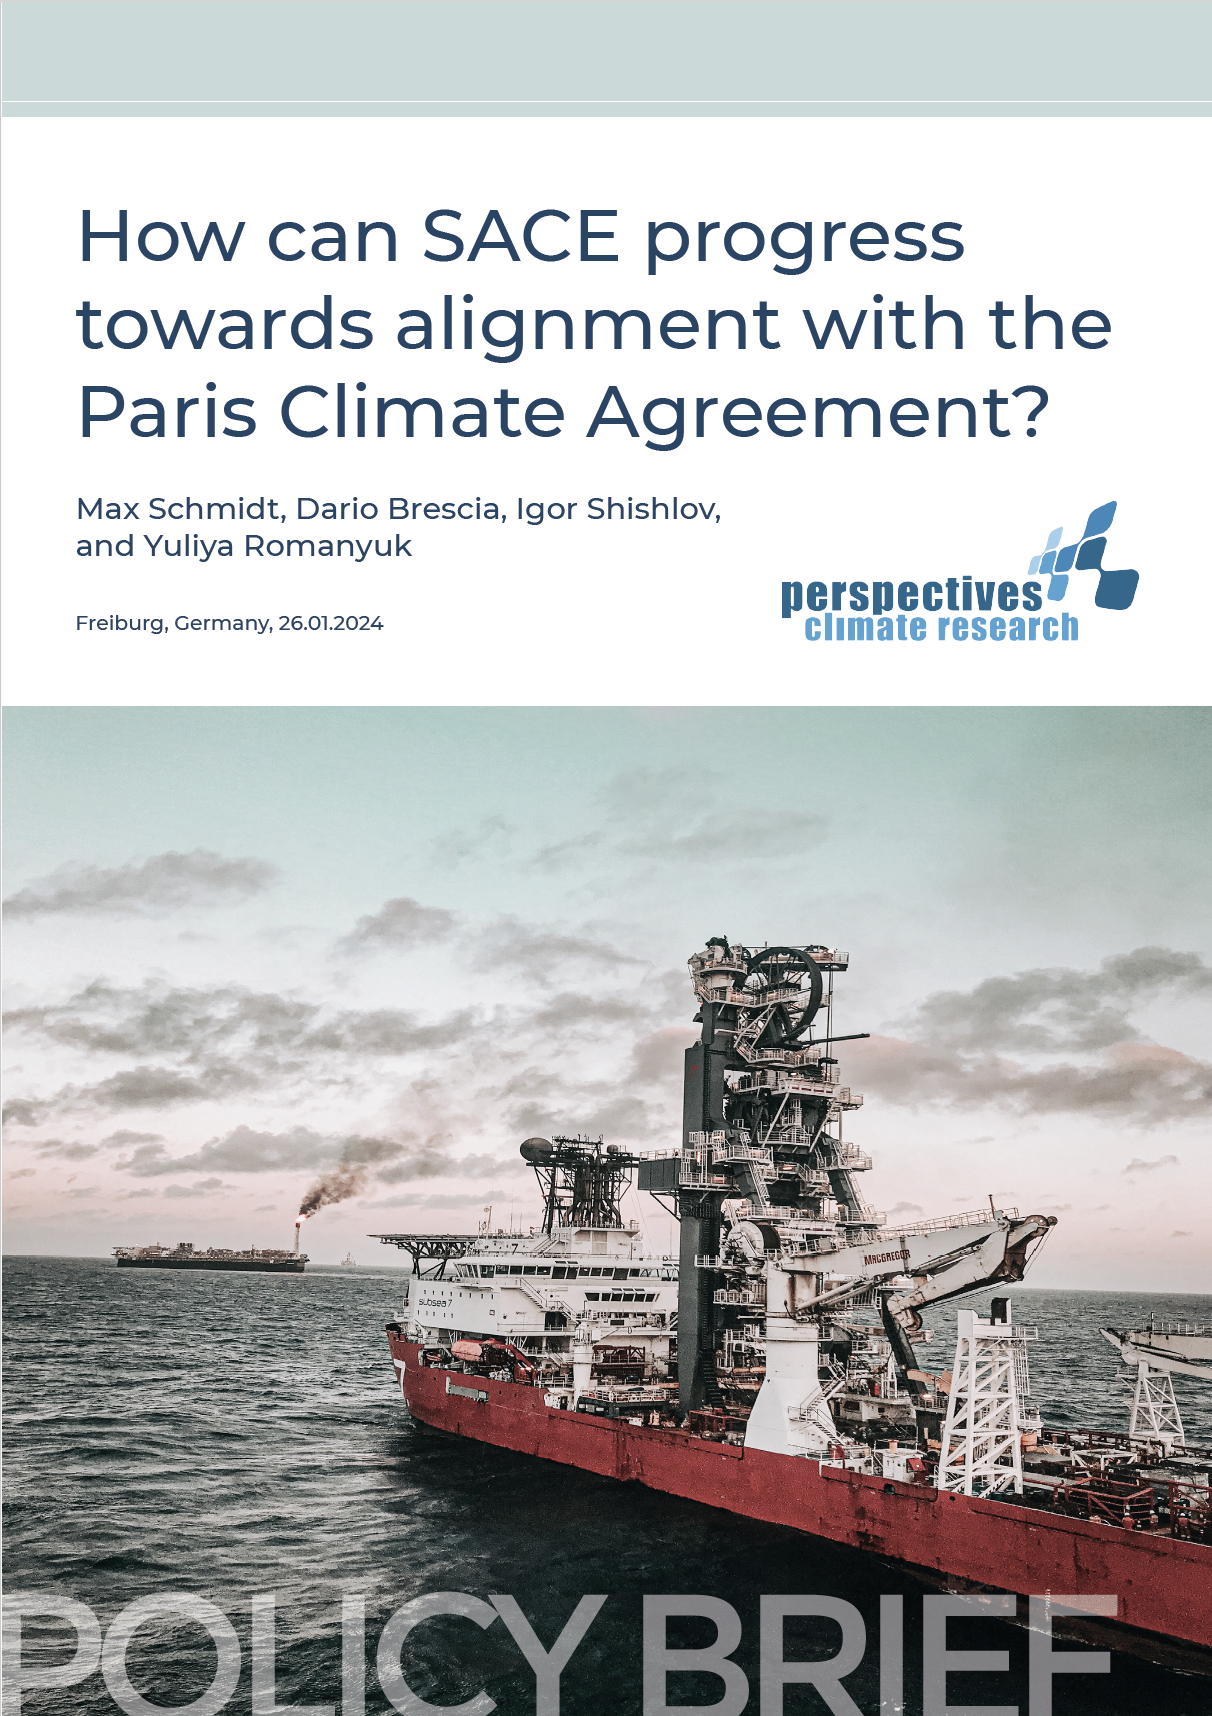 How can SACE progress towards alignment with the Paris Climate Agreement?